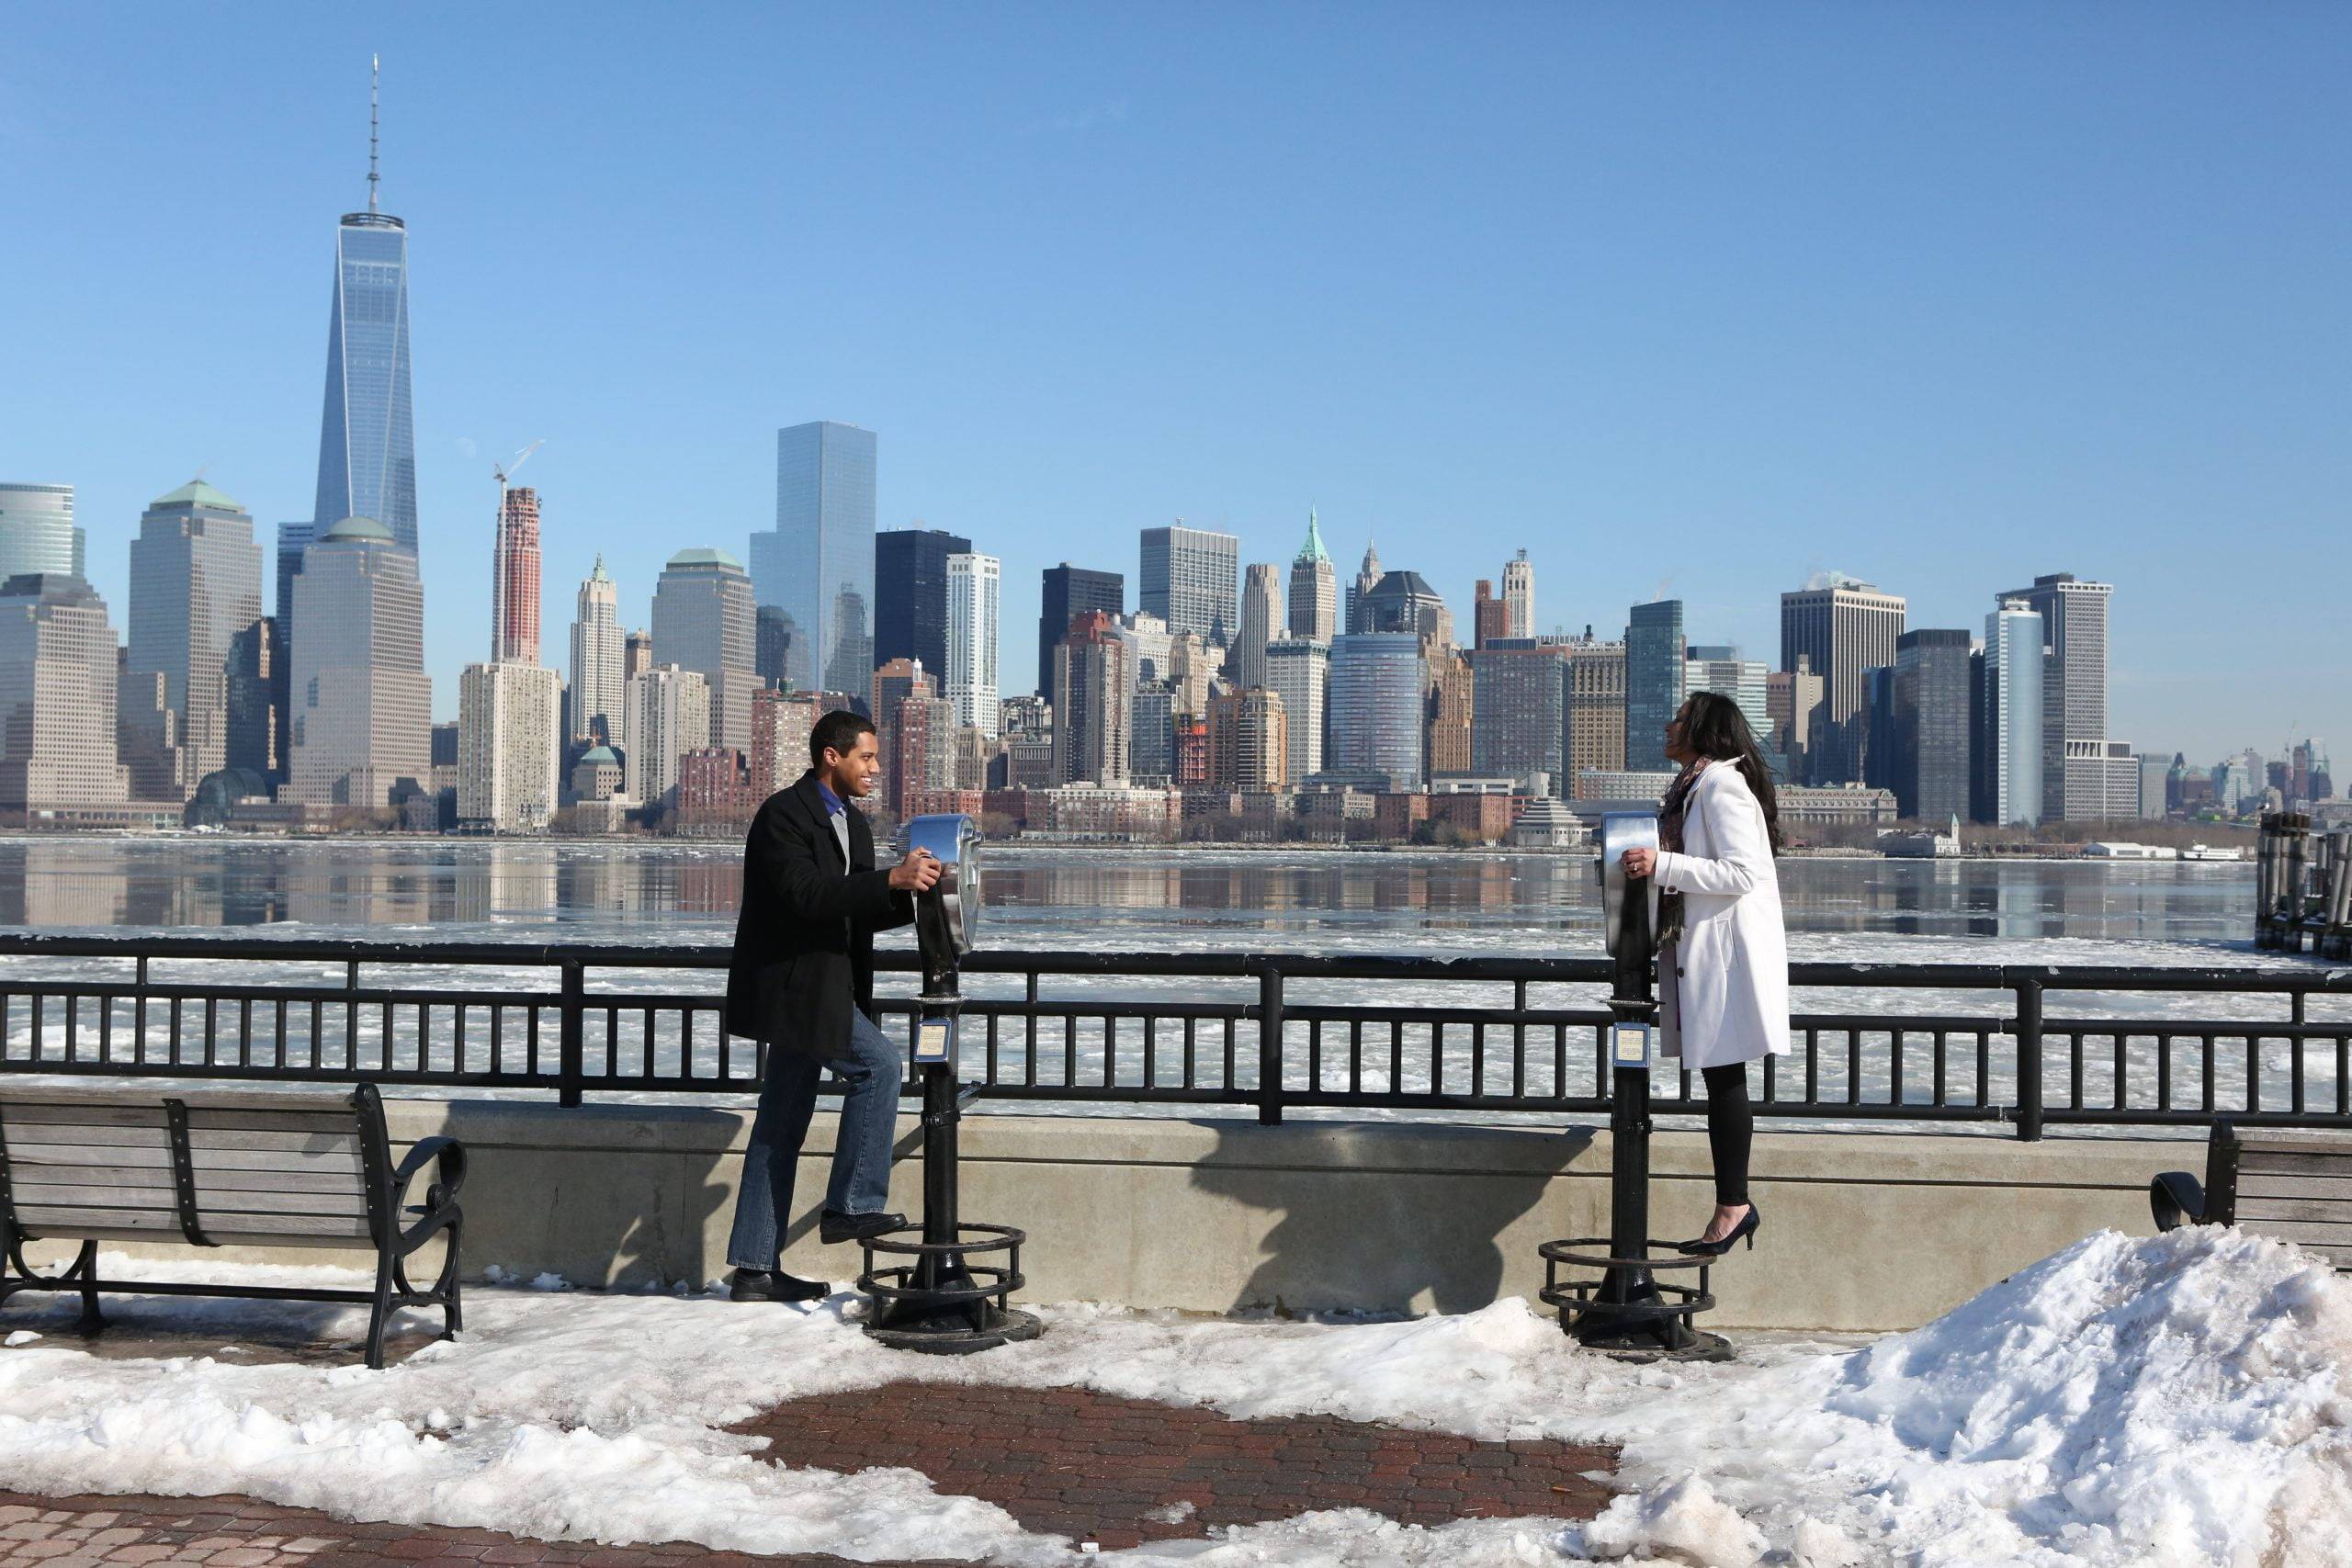 Two people standing on a bench in front of the manhattan skyline.